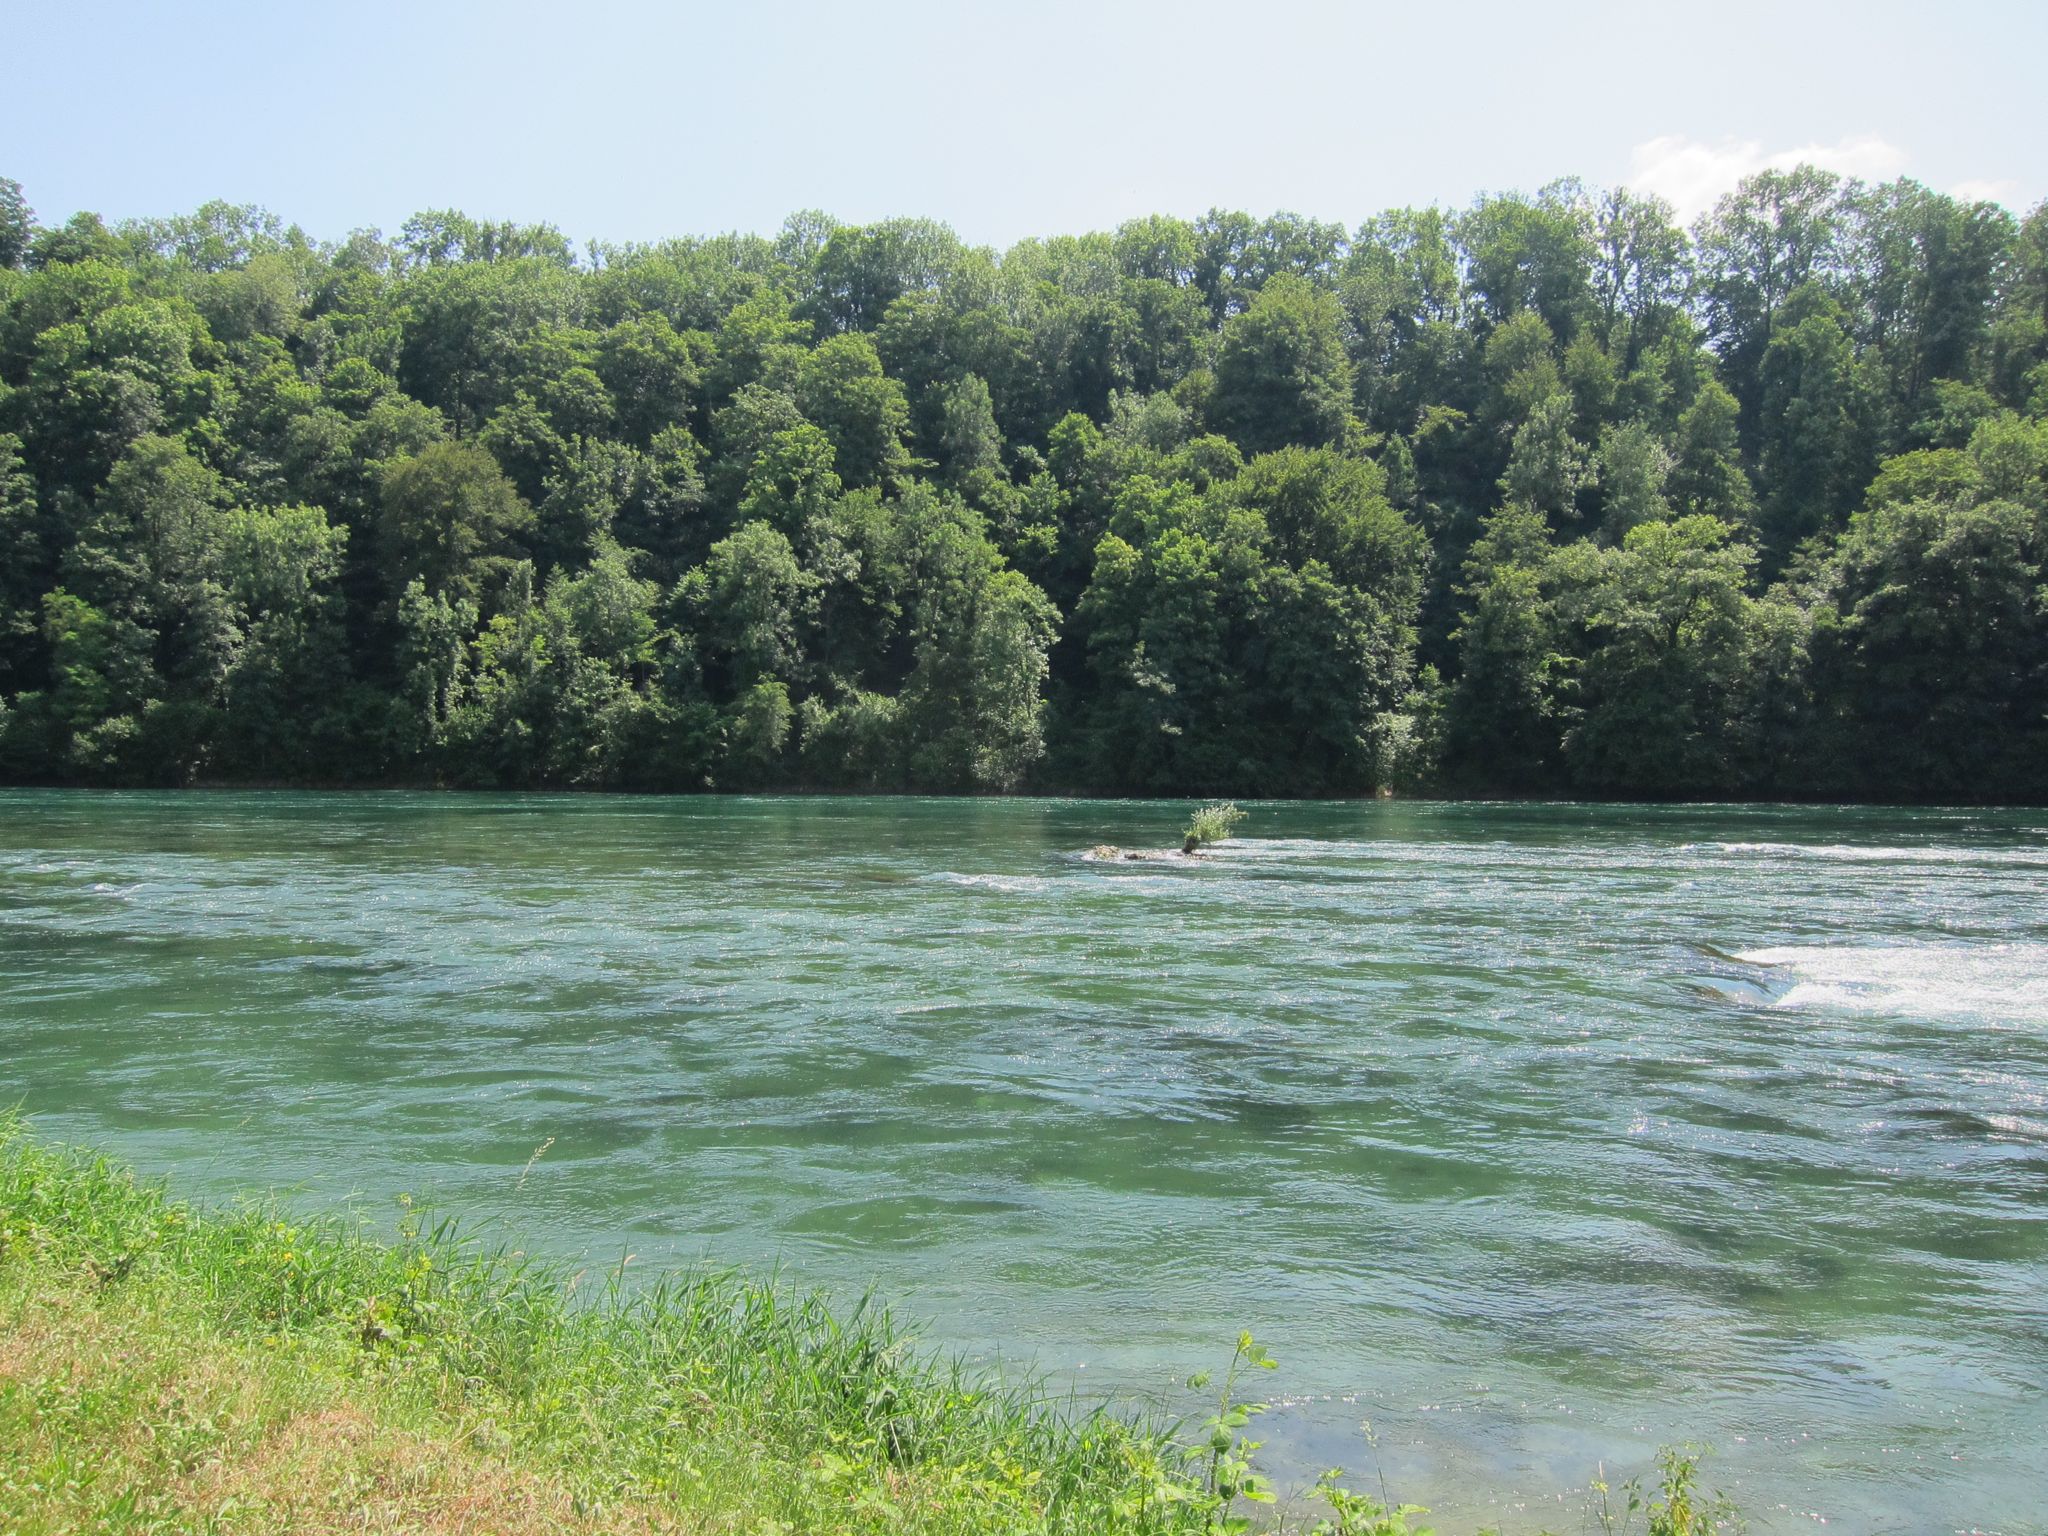 Photo 19 of 22 from the album Rheinfall.